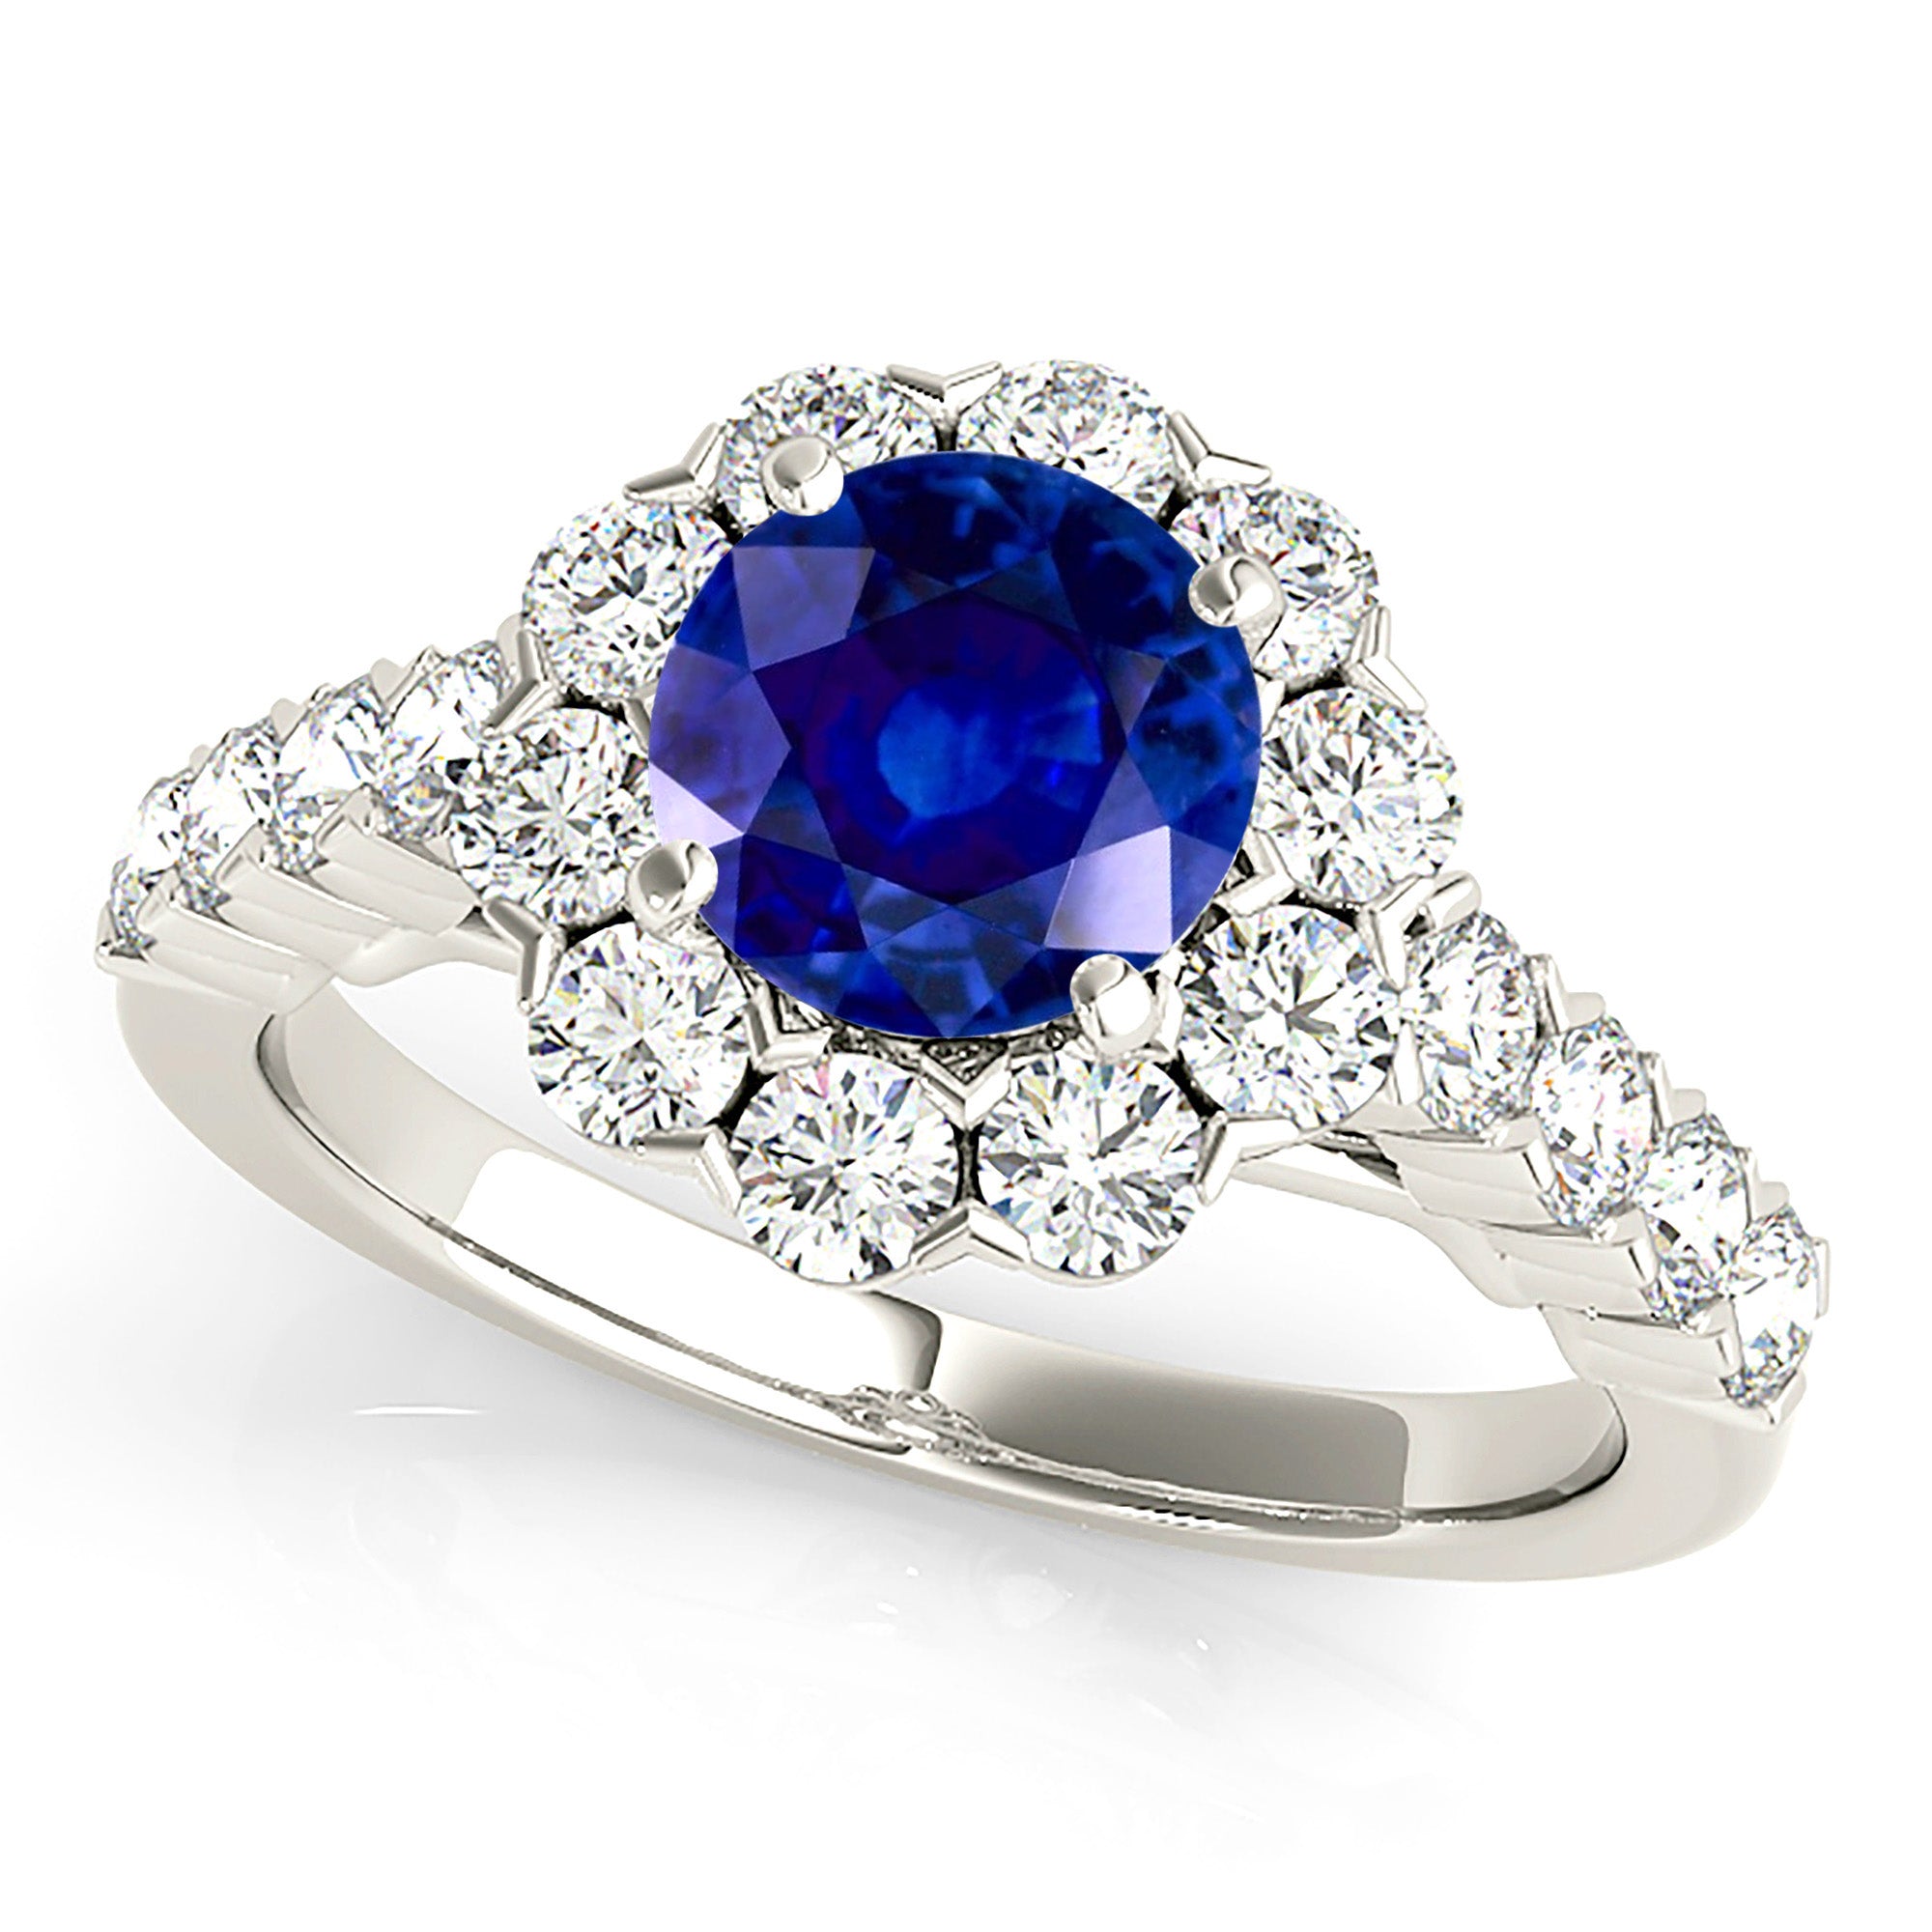 1.35 ct. Genuine Blue Sapphire Ring With 1.20 ctw. Diamond Floral Halo, Scalloped Diamond Band | Natural Sapphire And Diamond Gemstone Ring-in 14K/18K White, Yellow, Rose Gold and Platinum - Christmas Jewelry Gift -VIRABYANI